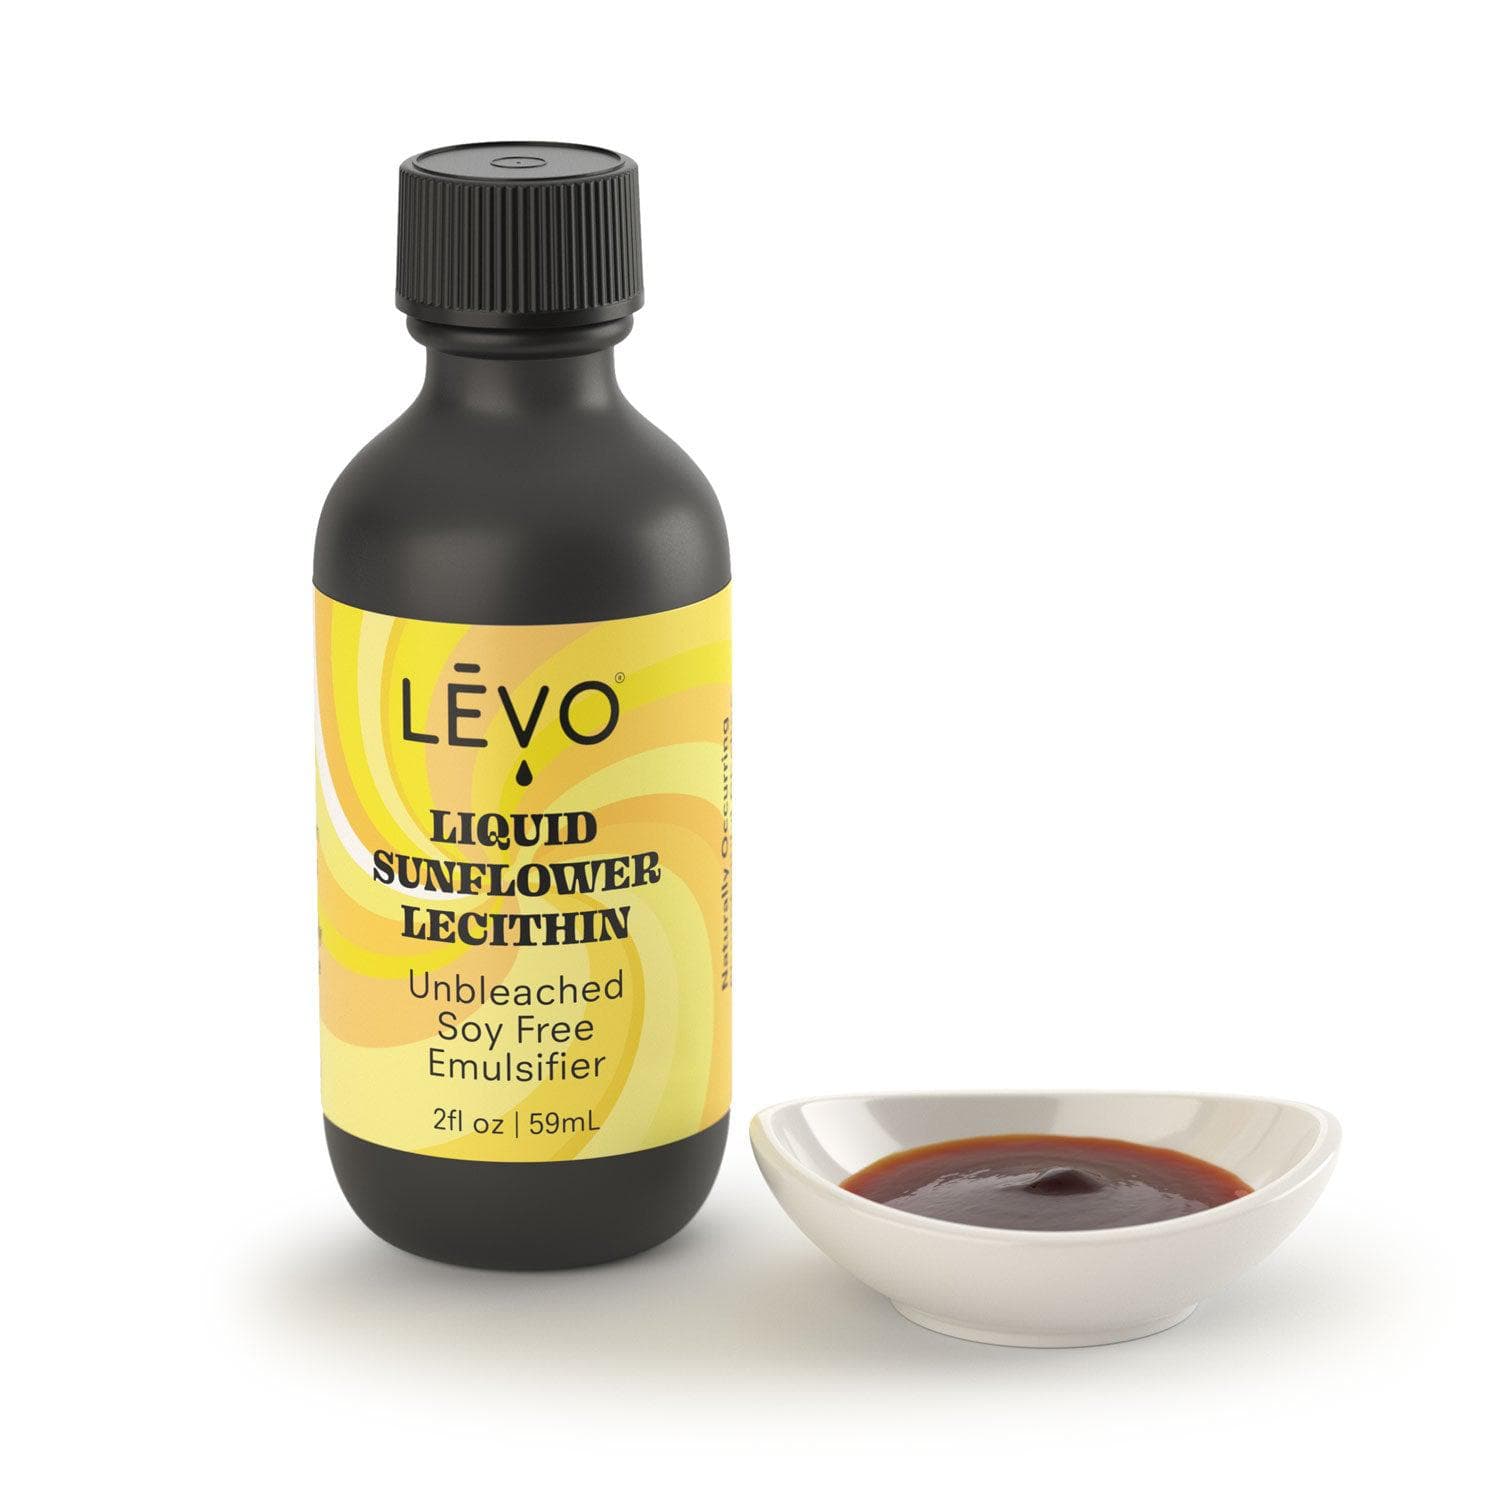 Liquid non-GMO sunflower lecithin is needed when you make LEVO infused gummies from scratch, but not when you use the pre-made mixes.